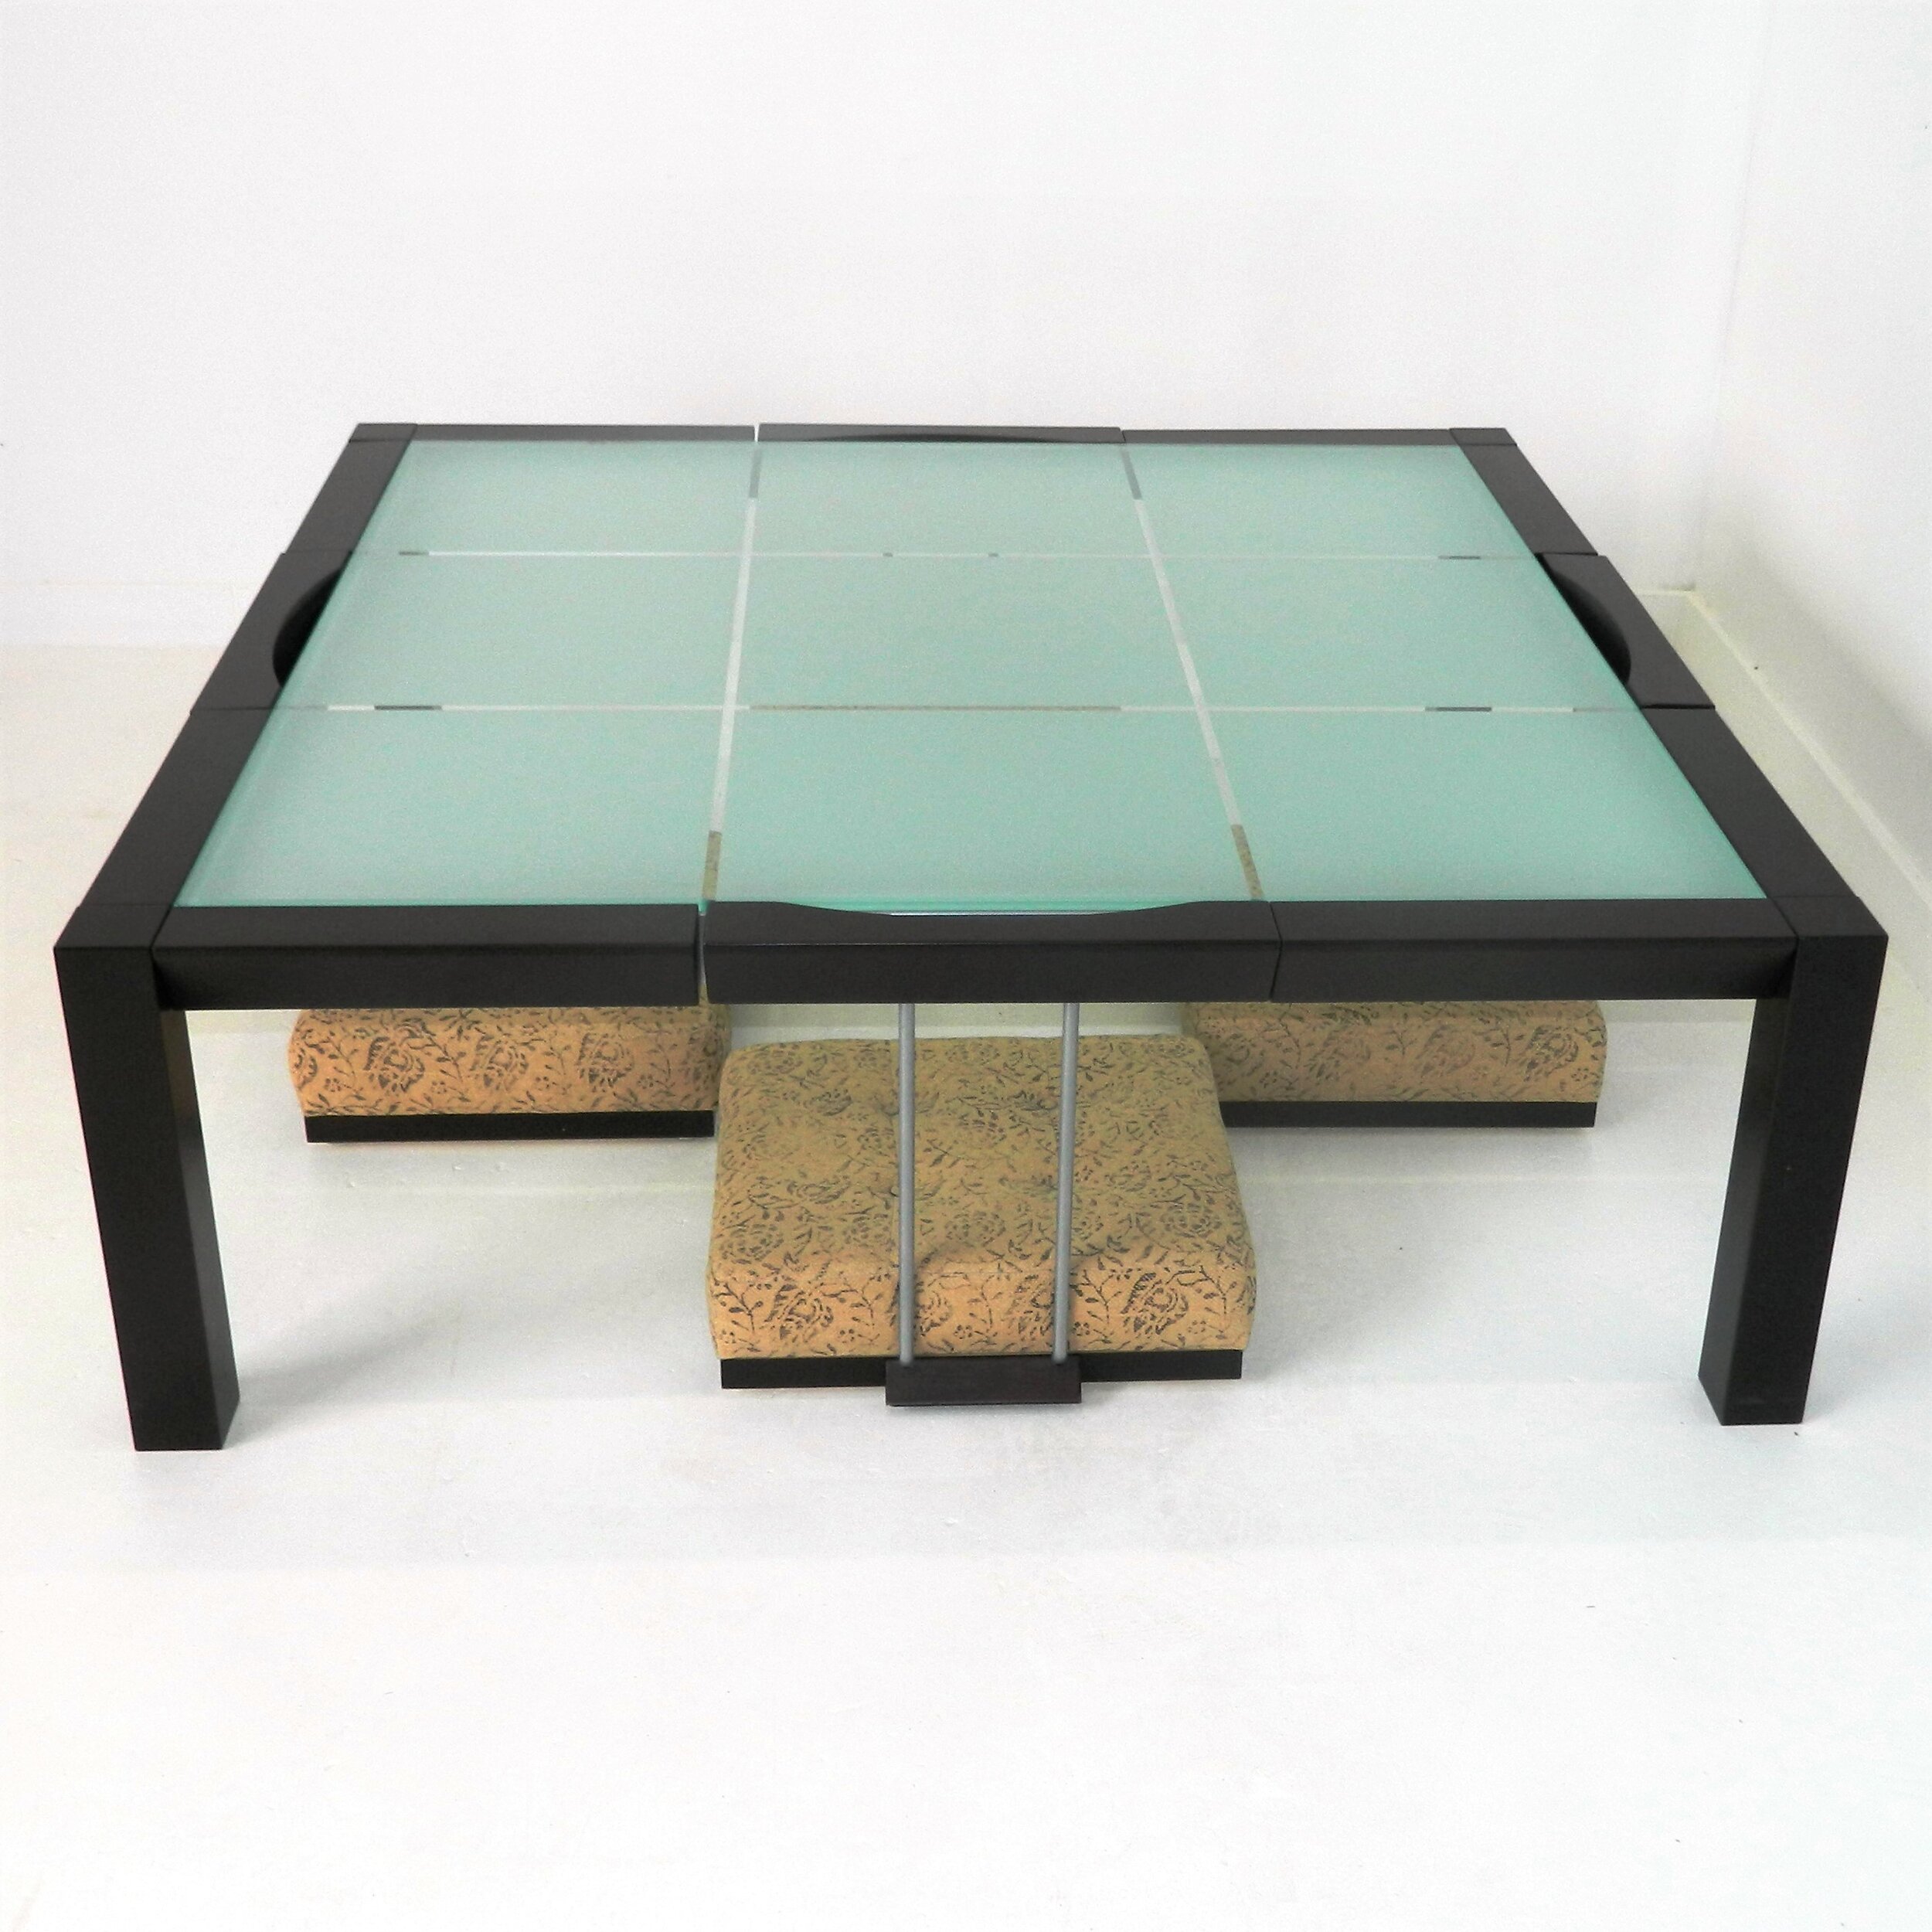 Ebony Wood Glass Japanese Style Dining Coffee Table With 4